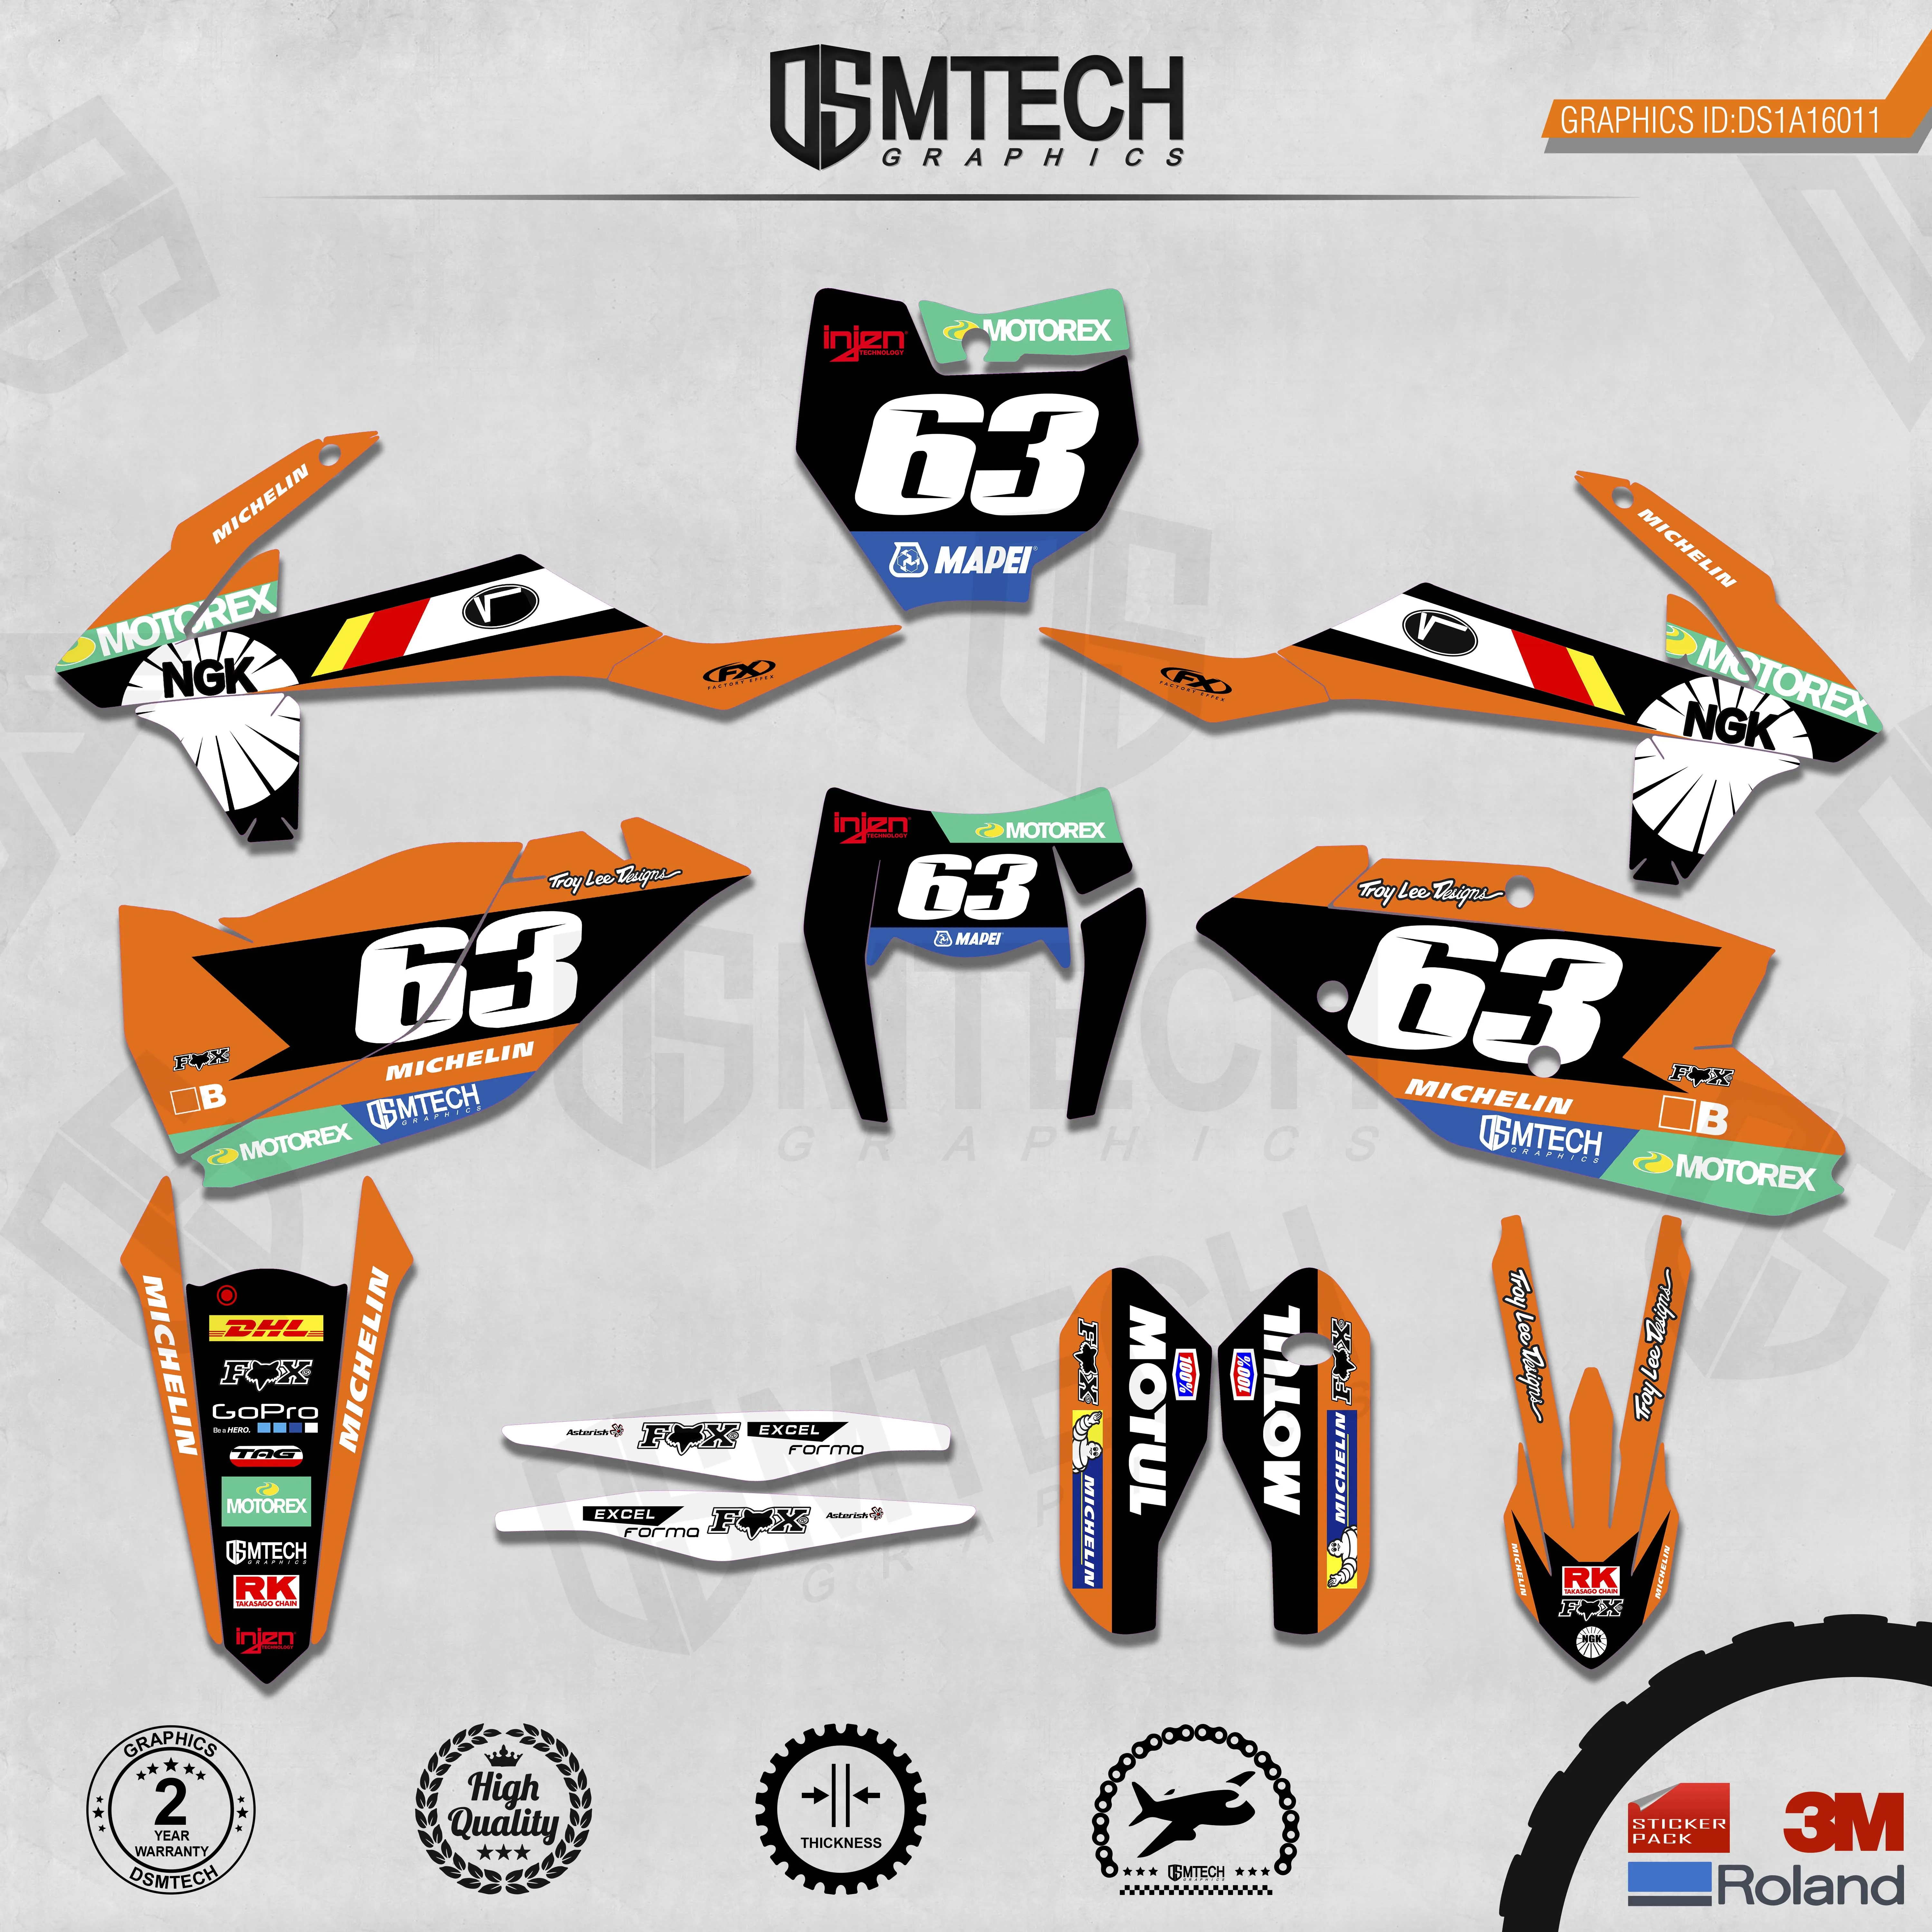 DSMTECH Customized Team Graphics Backgrounds Decals 3M Custom Stickers For KTM 2017-2019 EXC 2016-2018 SXF  011